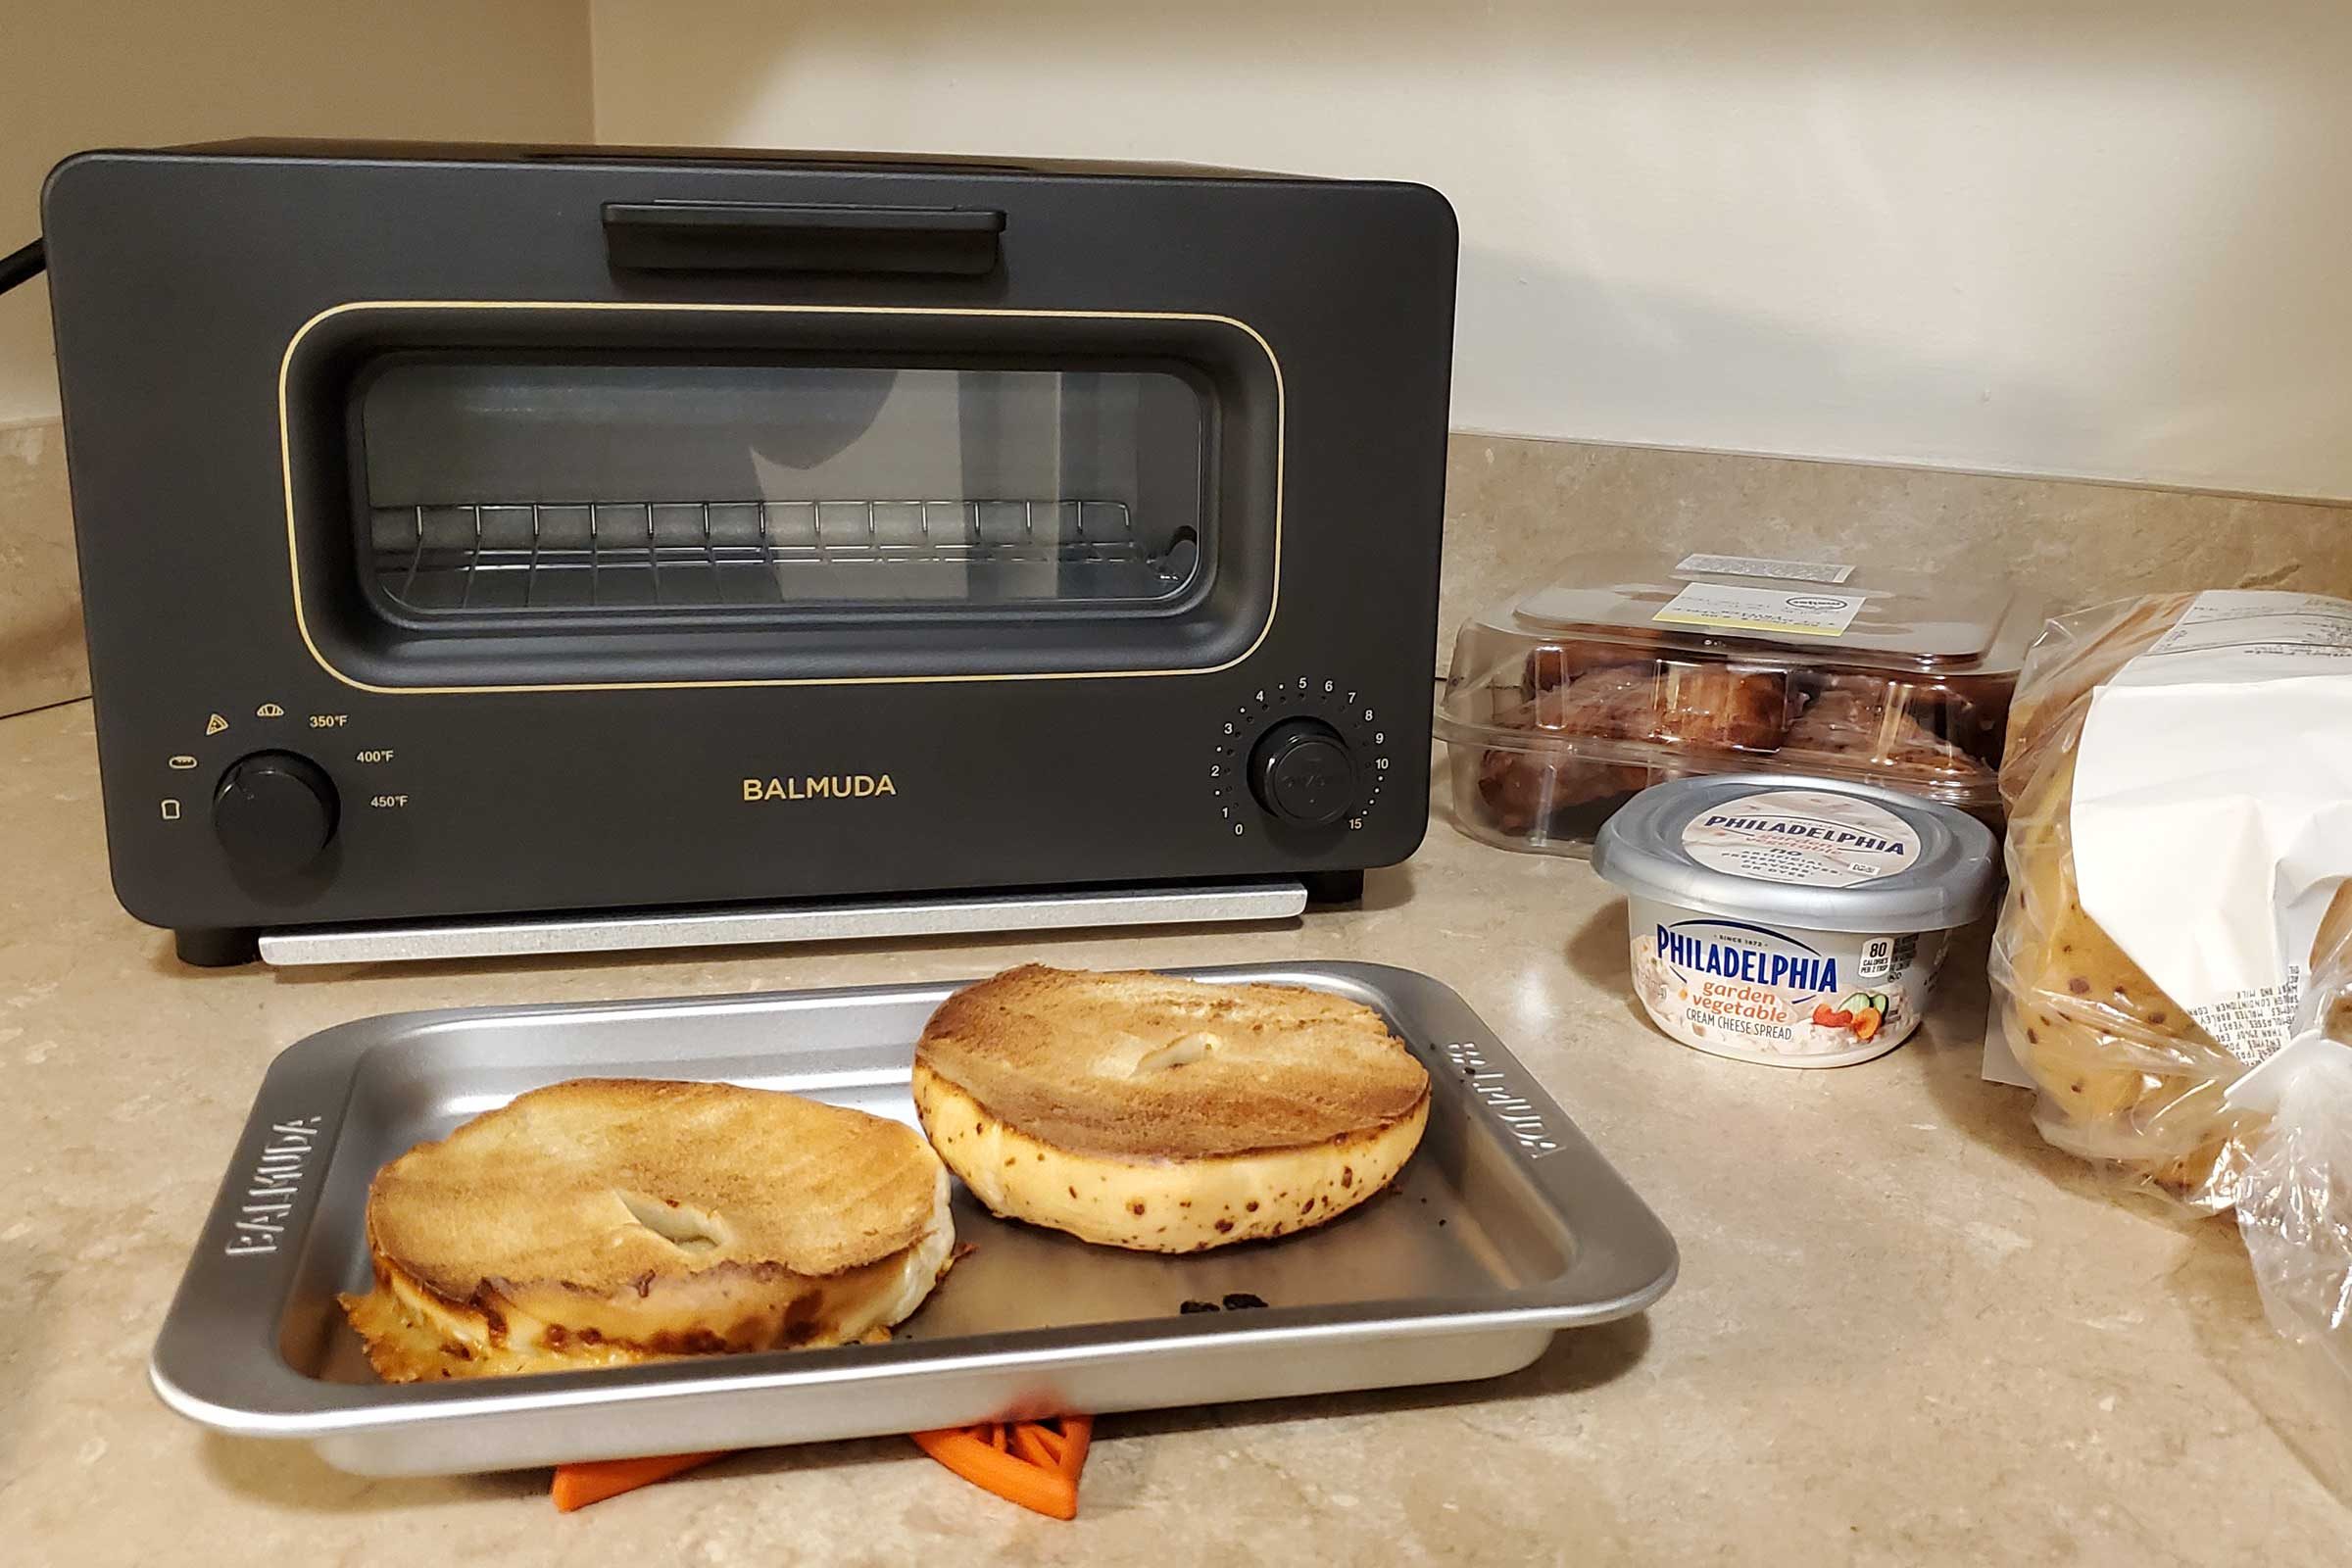 Balmuda Toaster Review: This $300 Toaster Oven Pits Design Against Function